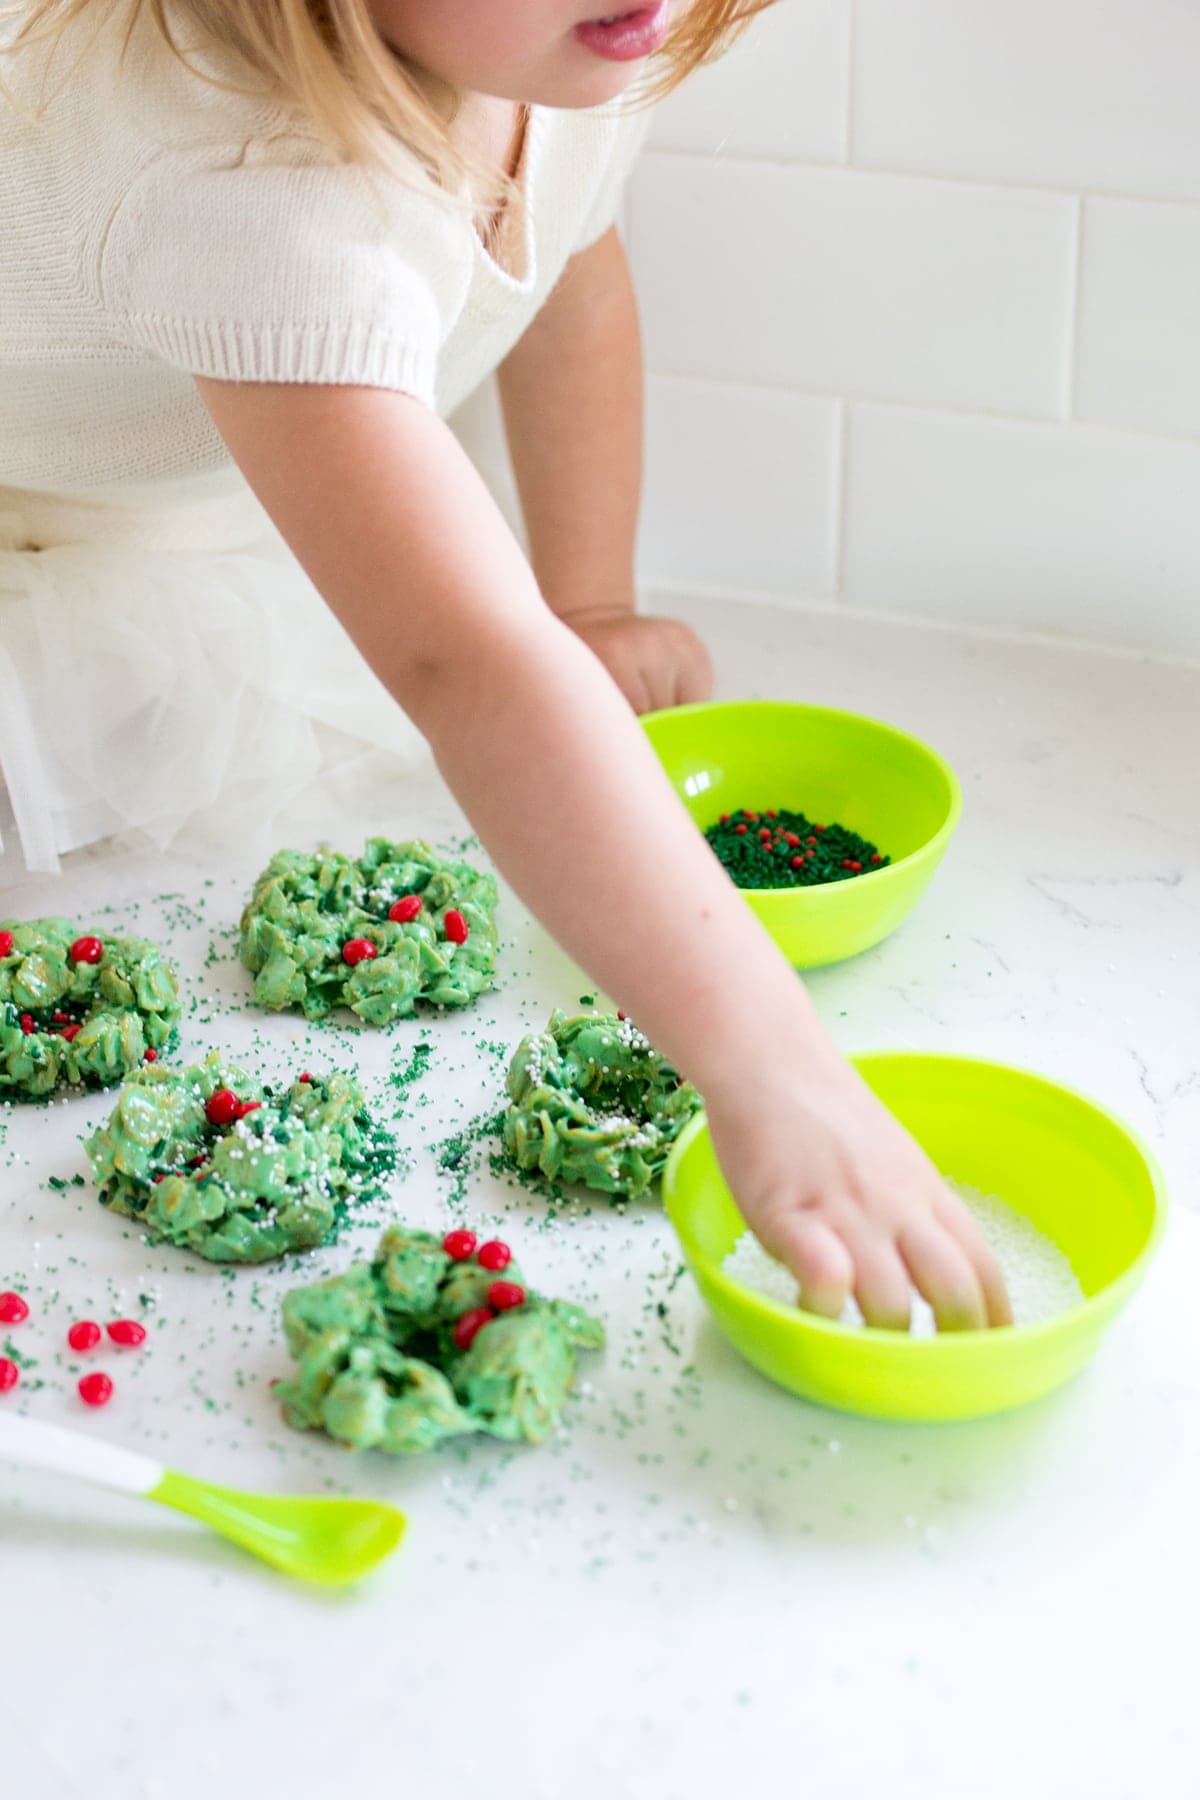 Classic Christmas Wreath Cookies, also known as holly wreath cookies, made with corn flakes and cinnamon candies are perfect for making with kids and leaving out for Santa on Christmas Eve.